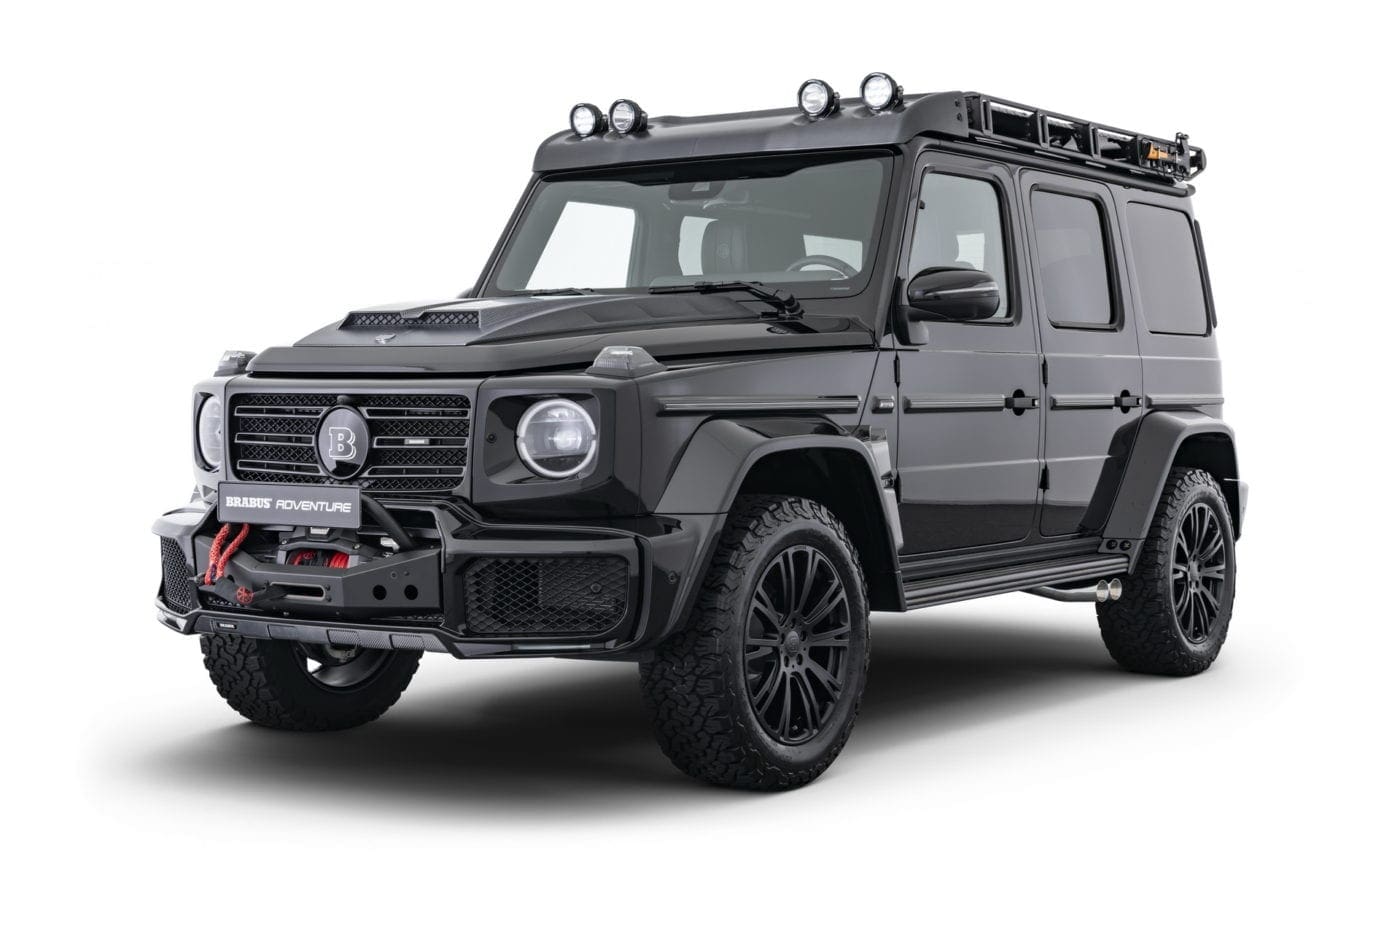 The New BRABUS ADVENTURE Off-Road Package is Here